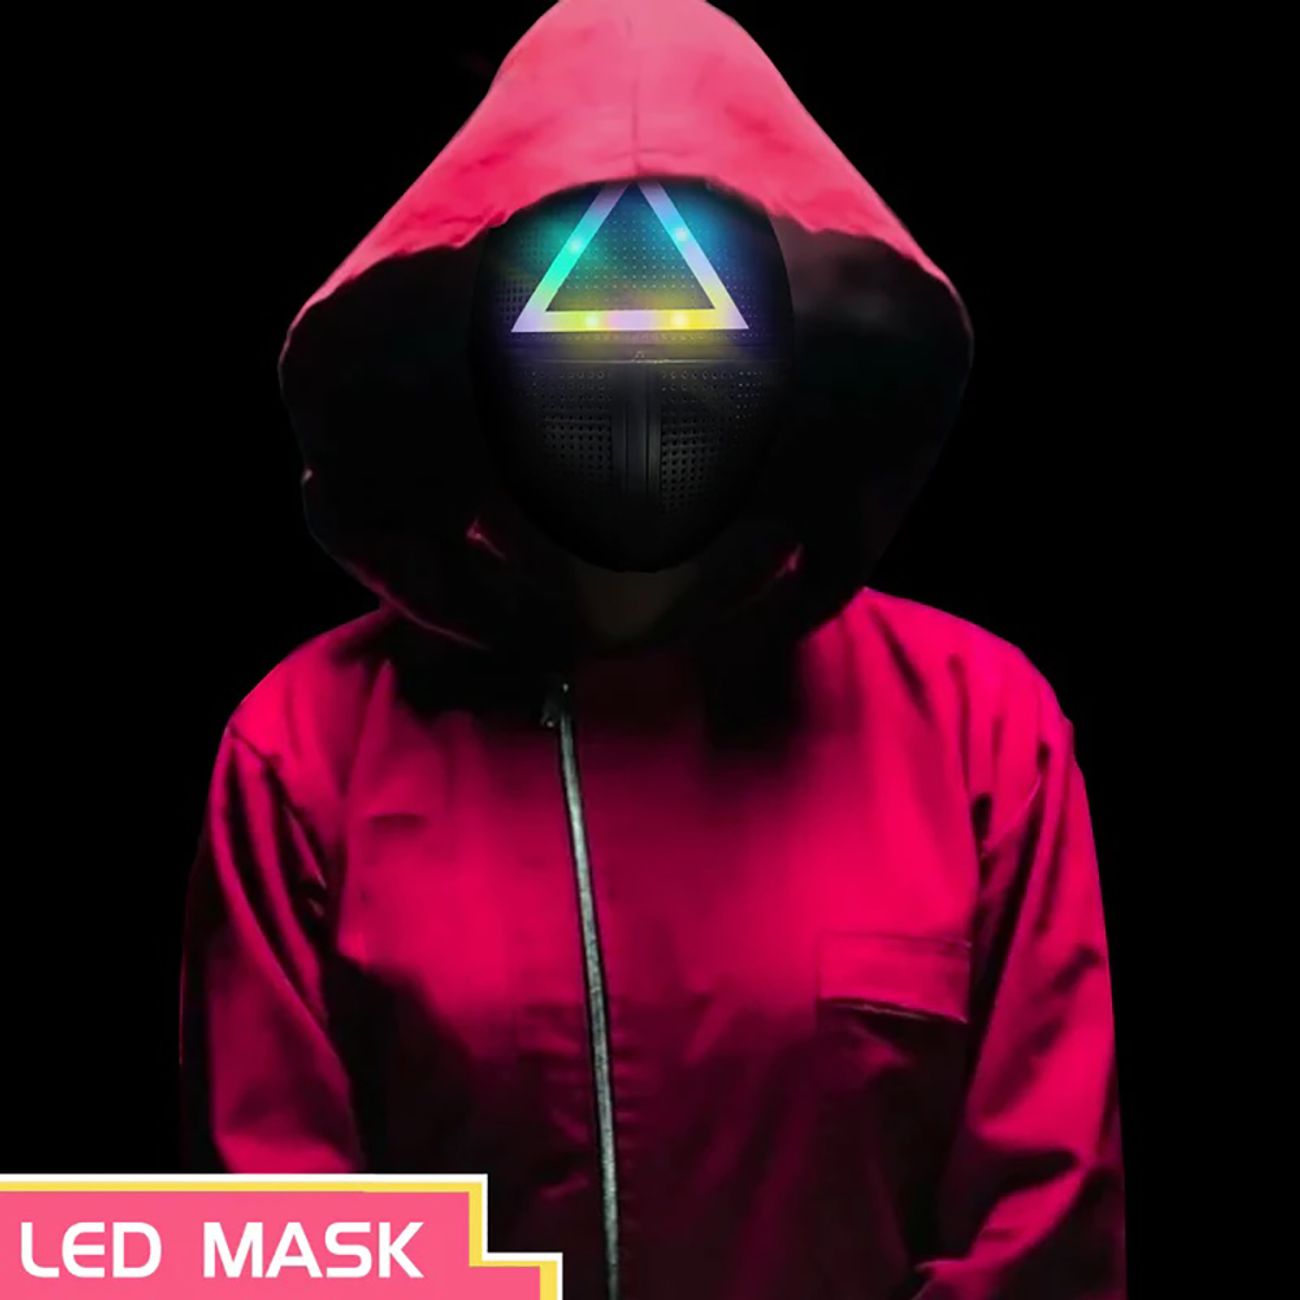 squid-game-triangle-led-mask-87617-2